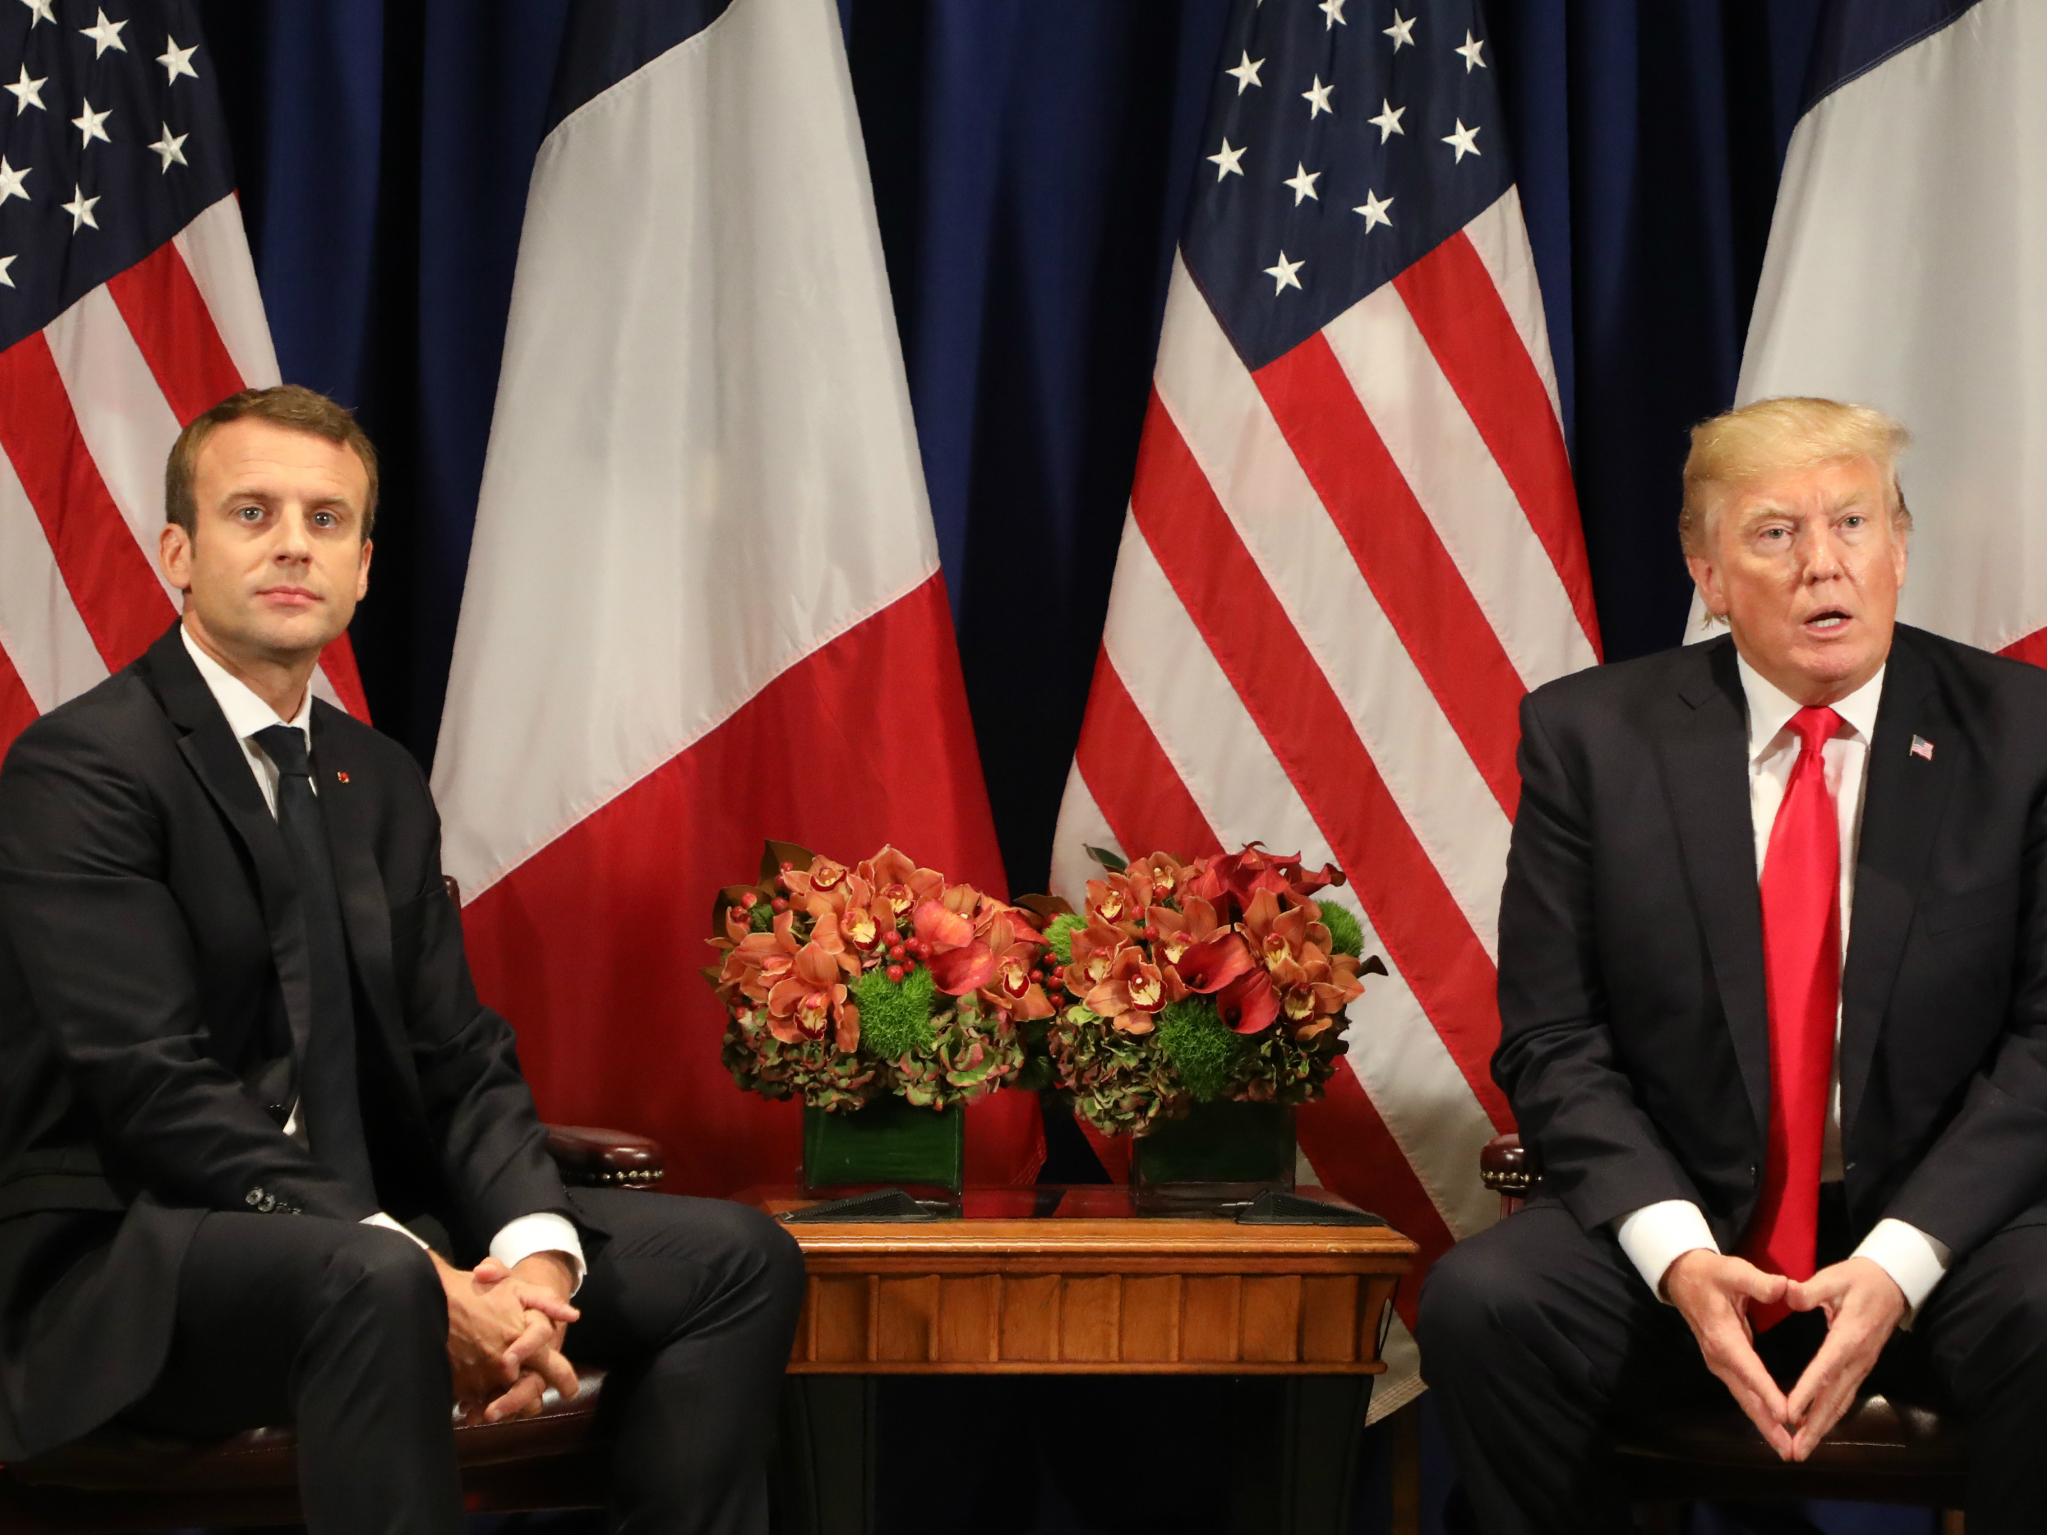 France's president Emmanuel Macron has not invited US President Donald Trump to a climate change summit this December in Paris.